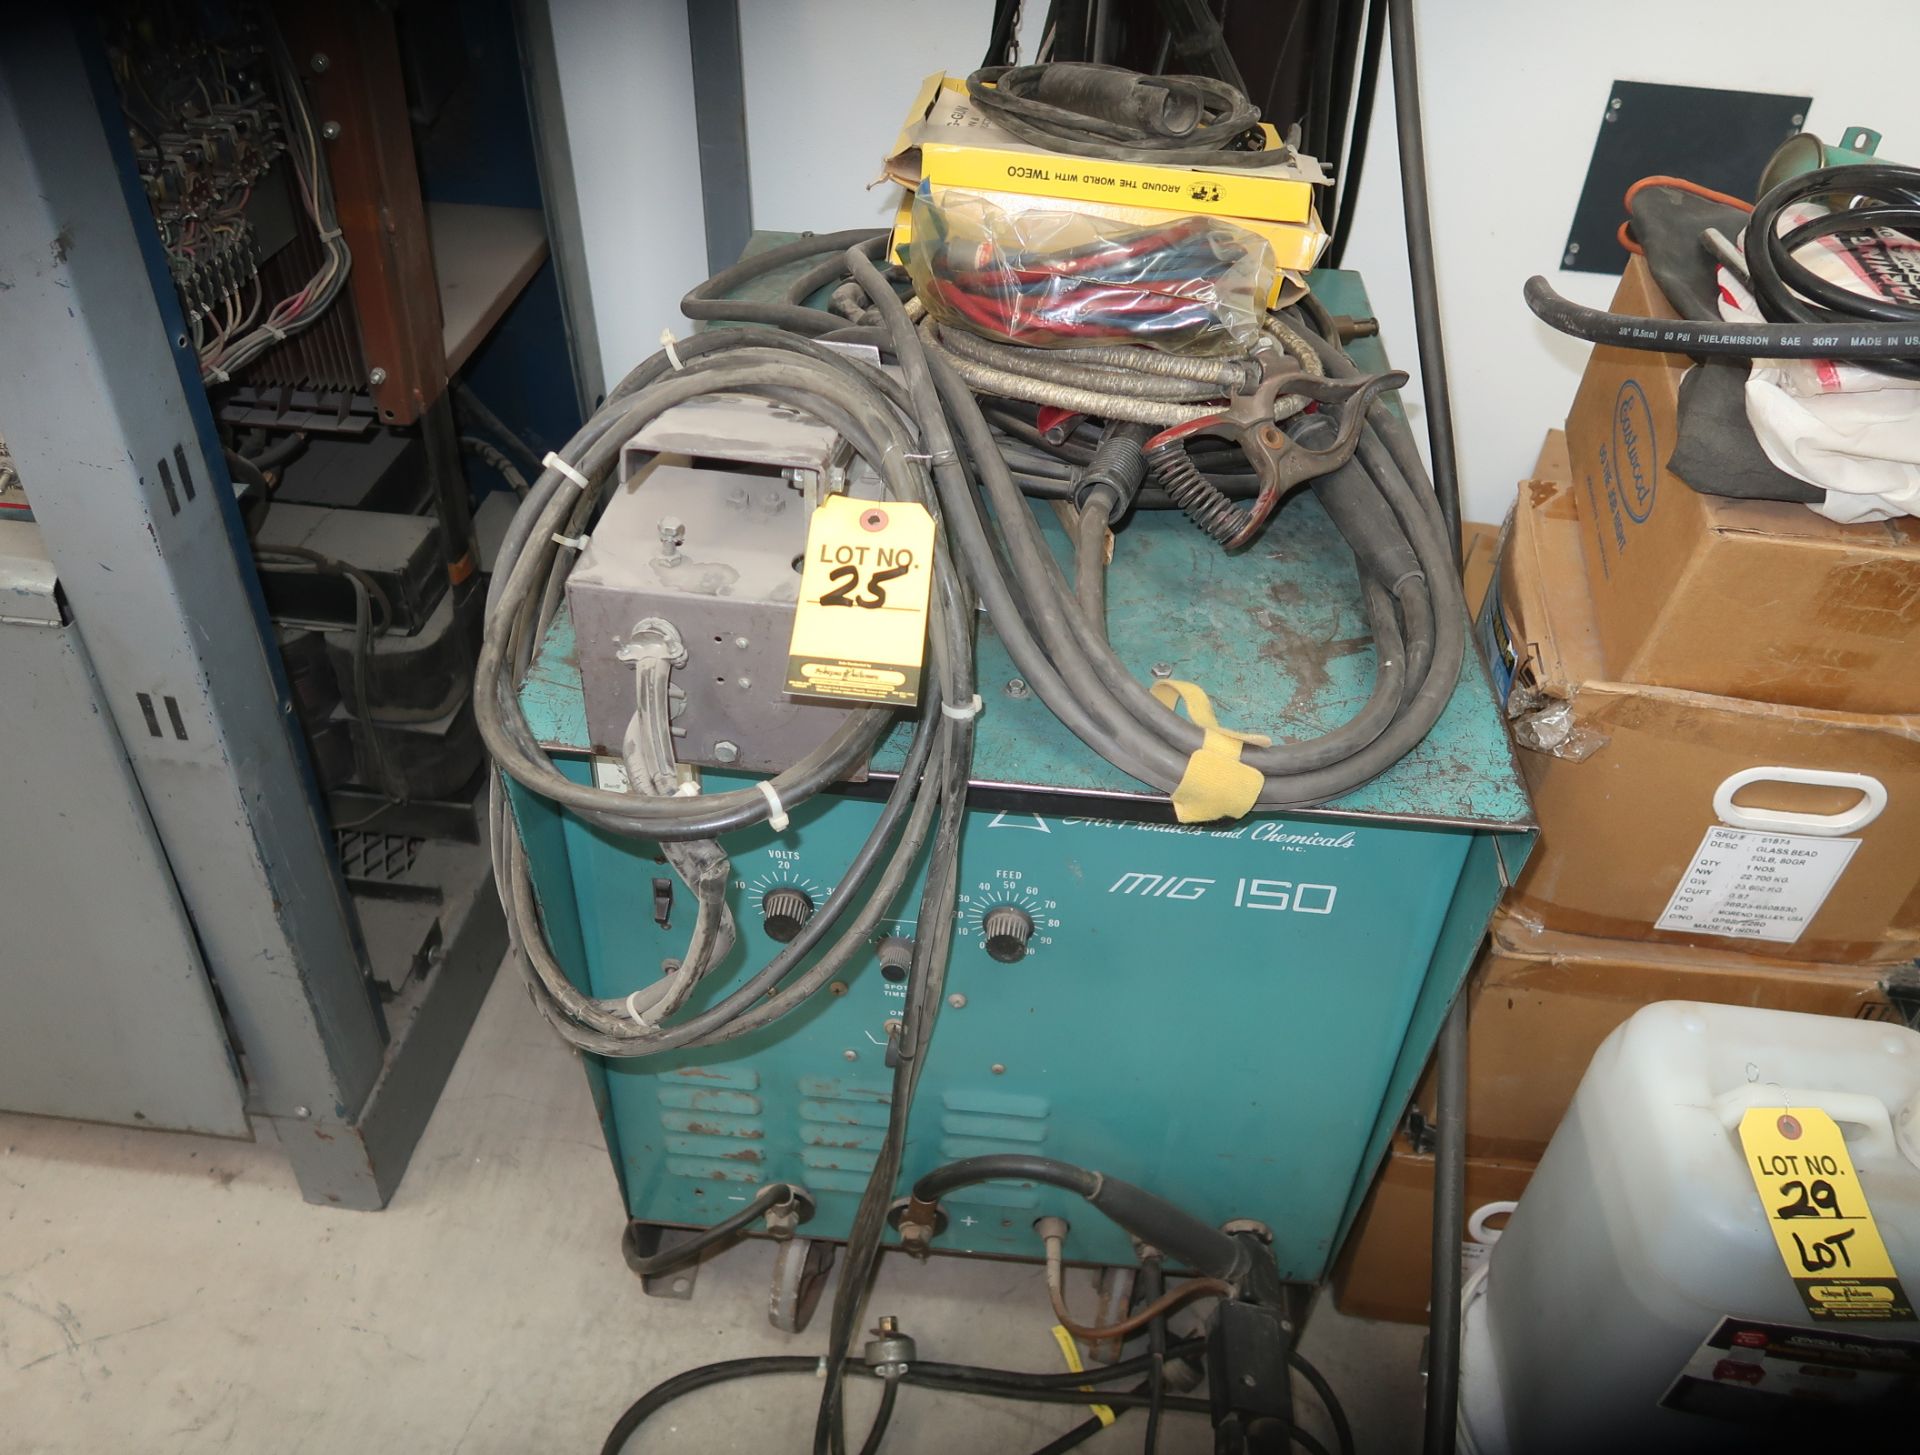 AIR PRODUCTS MIG 150 WELDER W/LEADS, GROUND, TANK, ETC., 230V 1PH